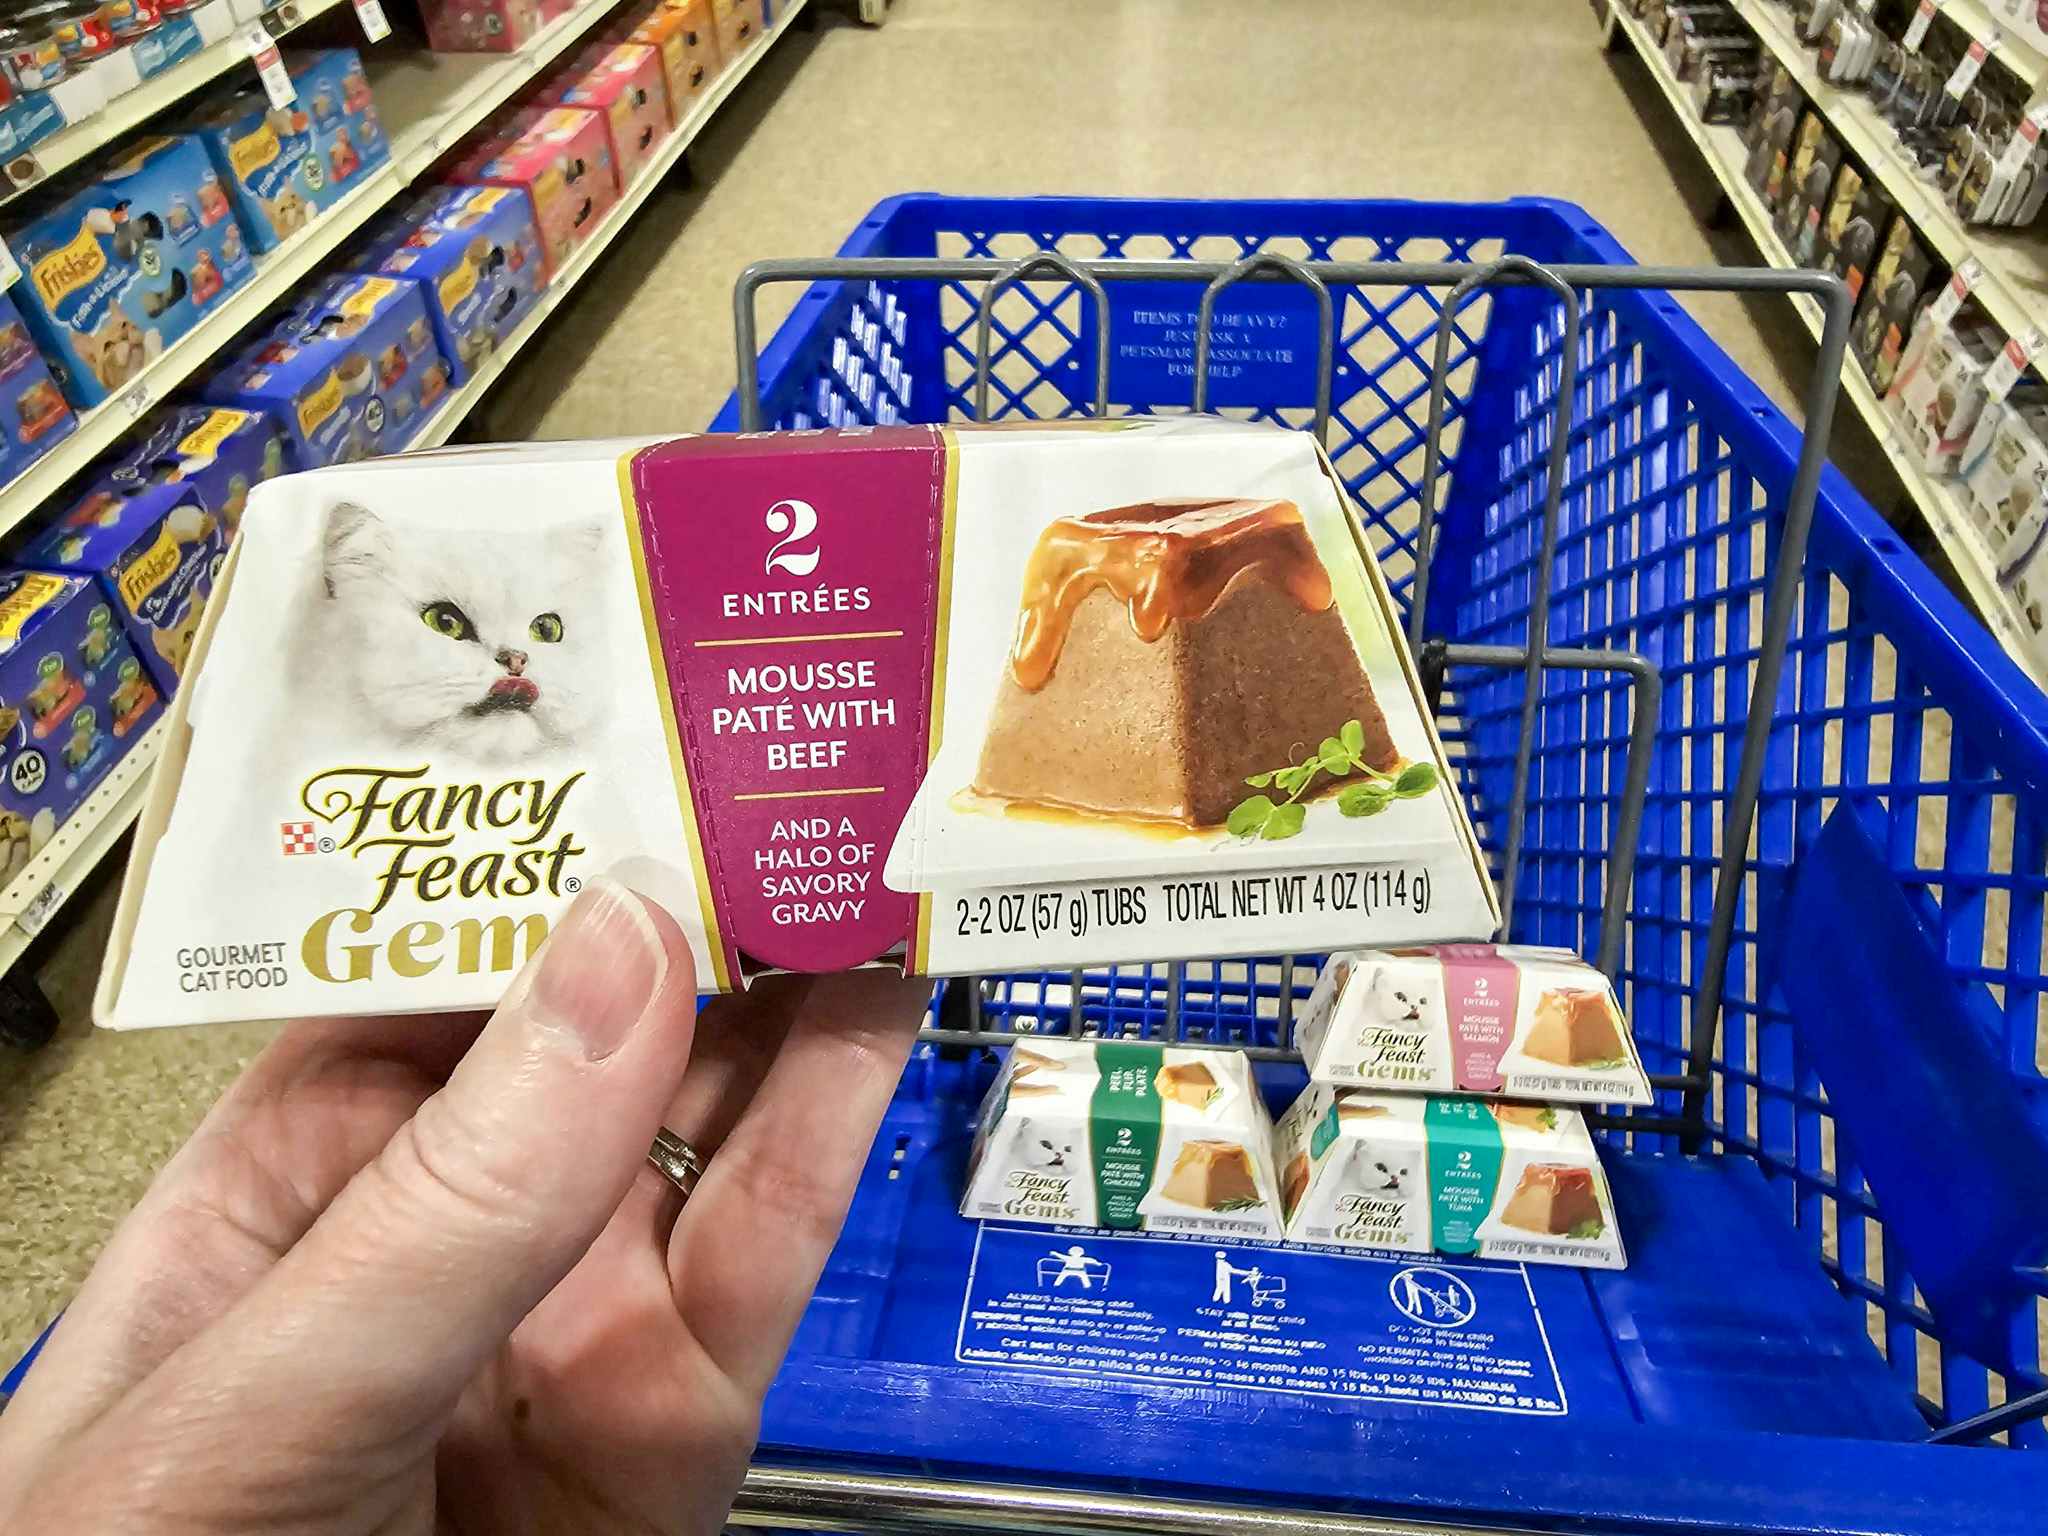 person holding a container of fancy feast cat food over a blue cart with more cat food in it